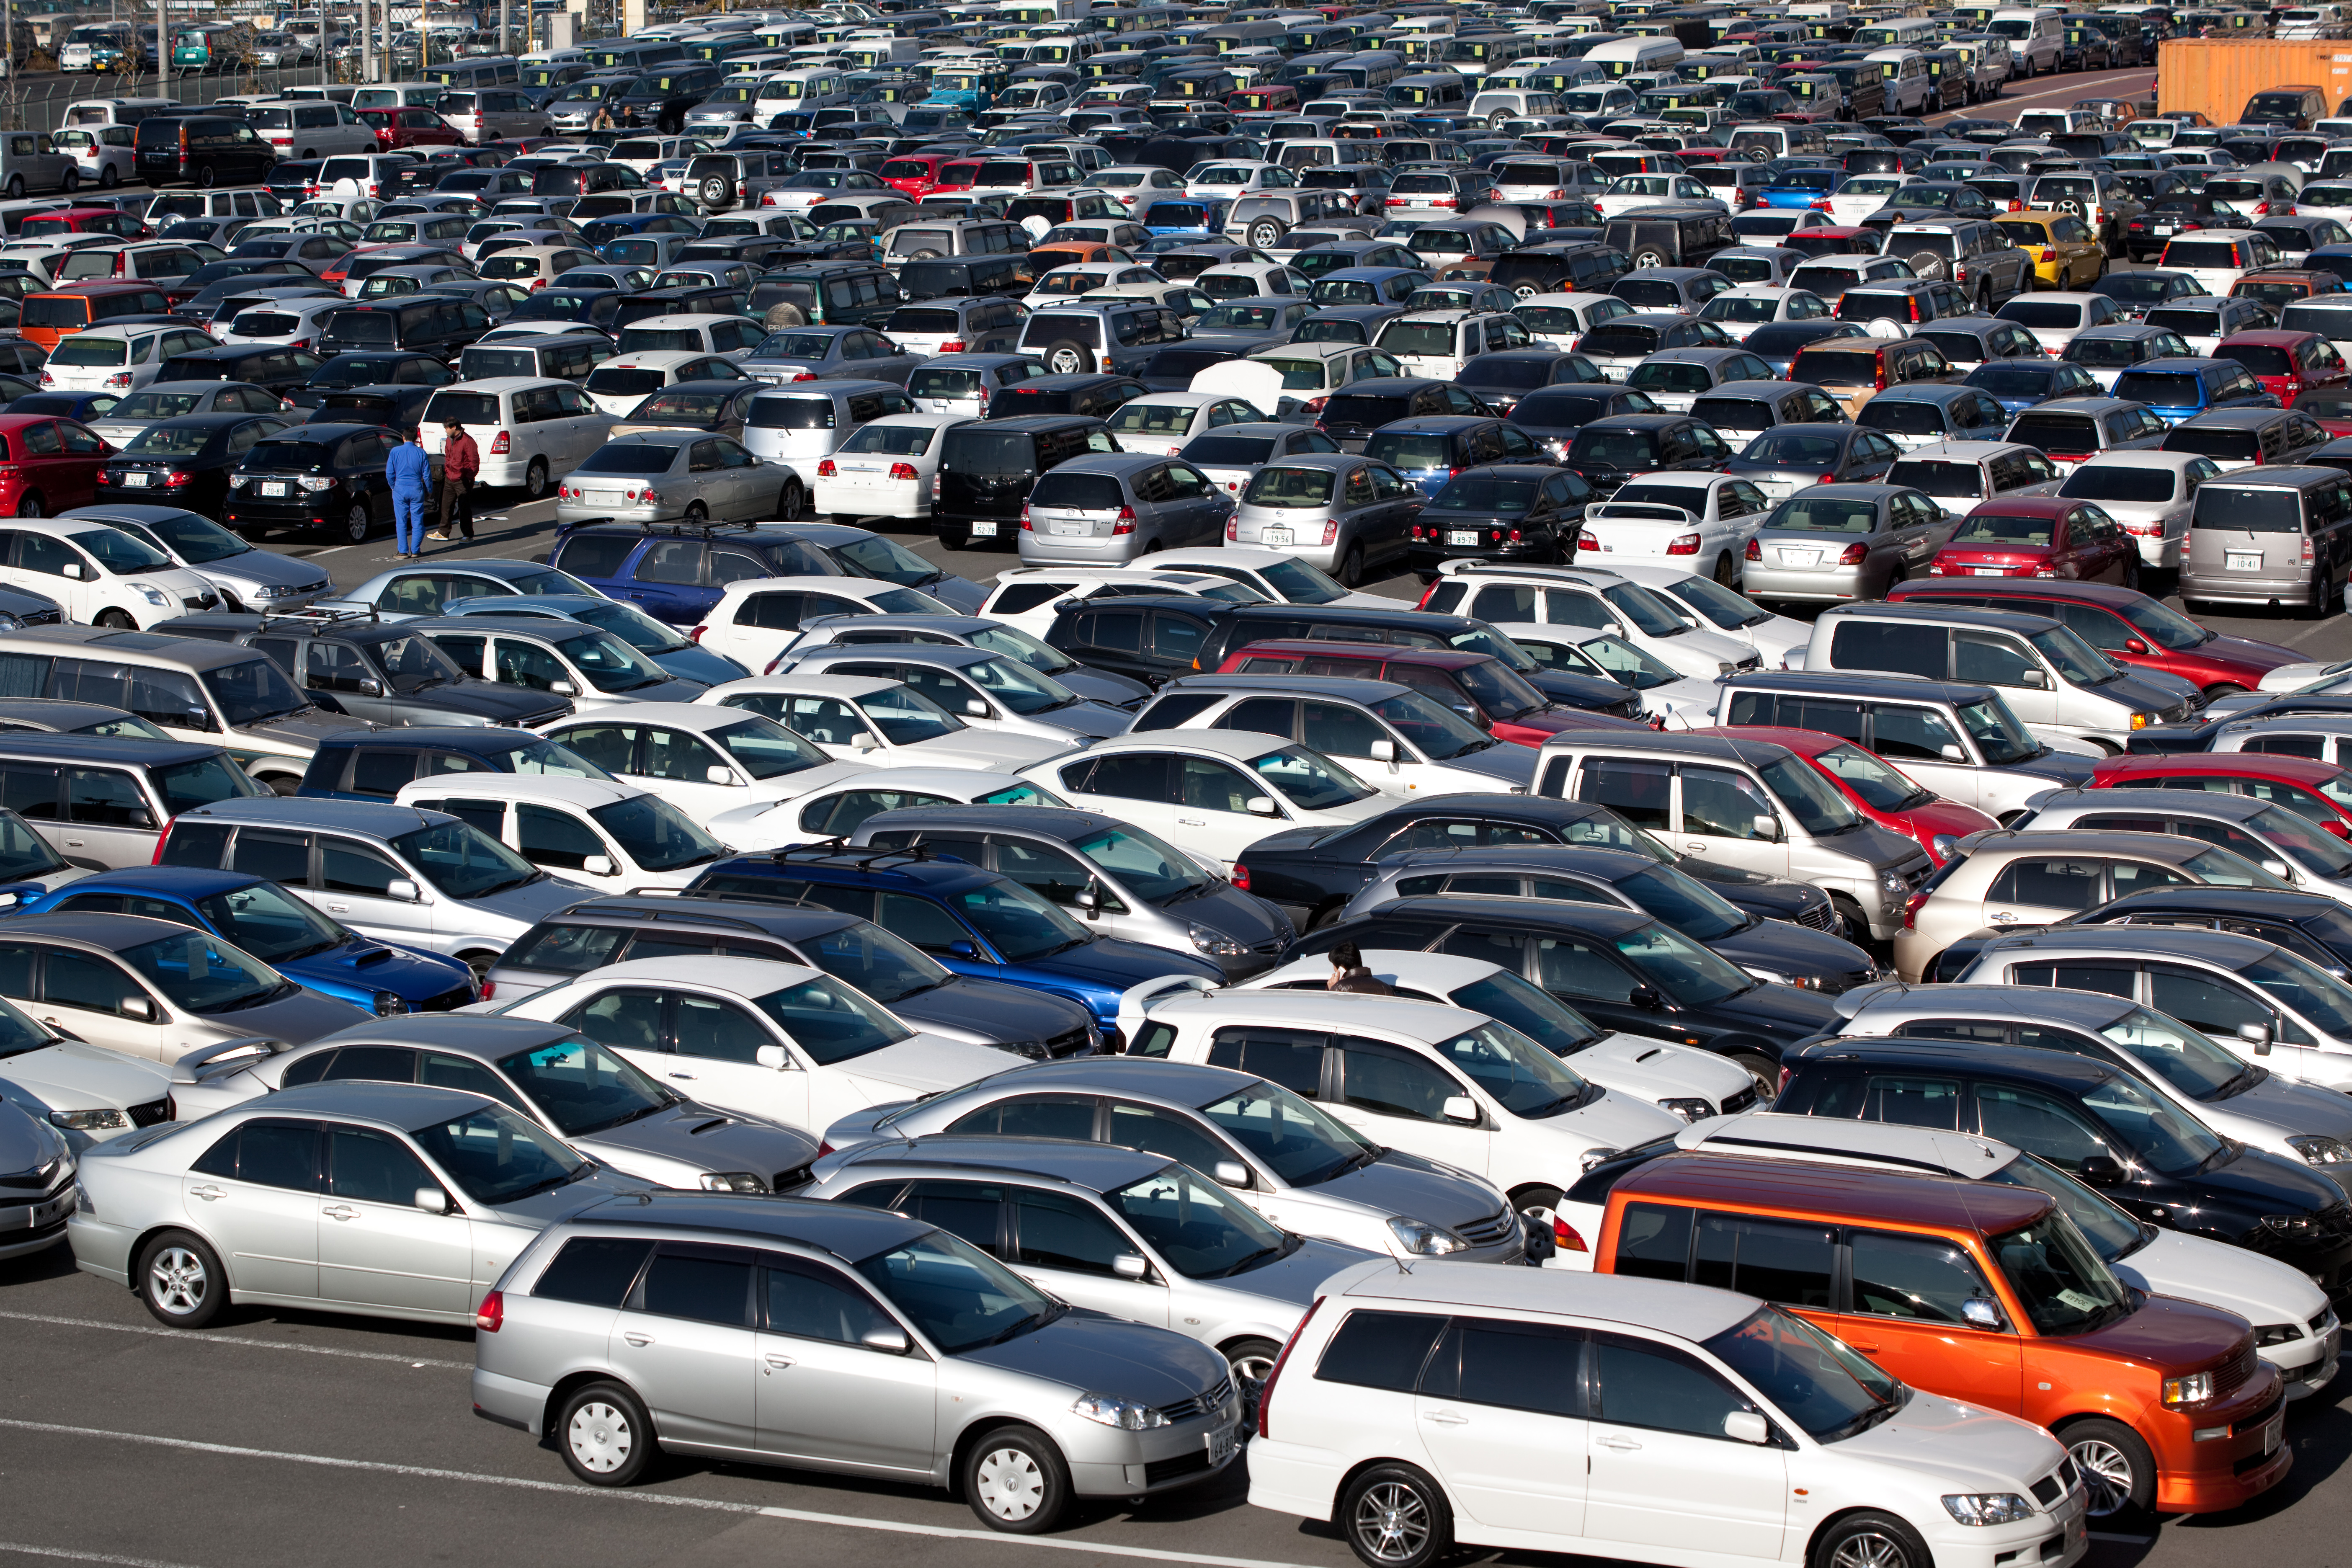 Nashville International Airport parking lot packed with vehicles.